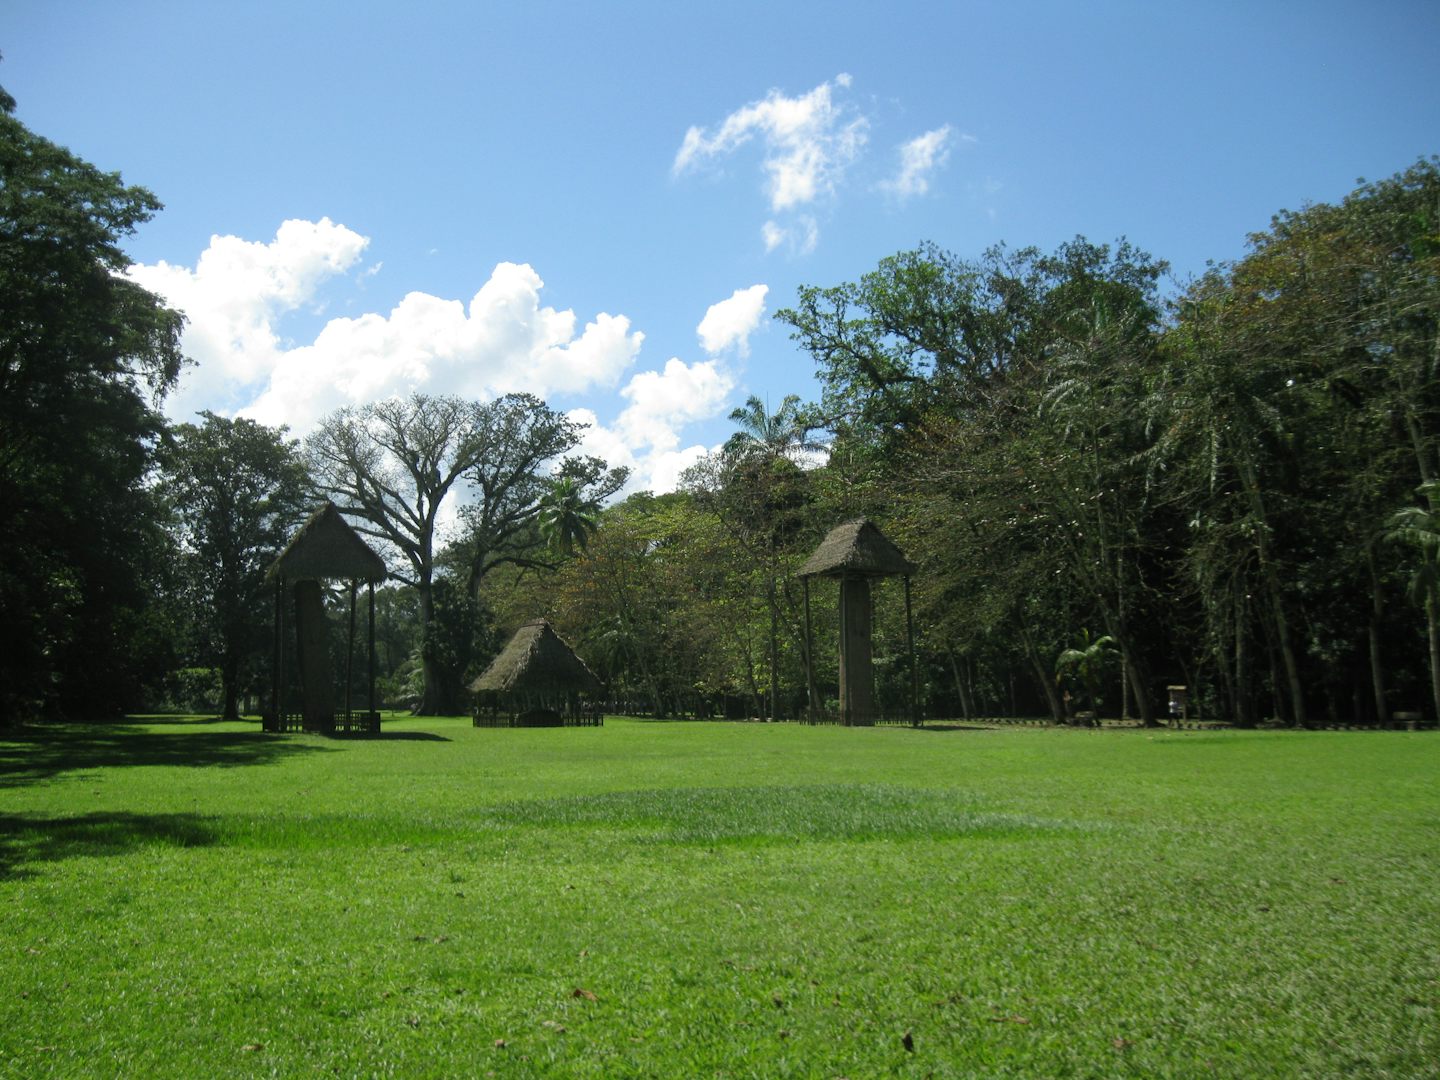 mayan ruins in Guatemala; one of our shore excursions